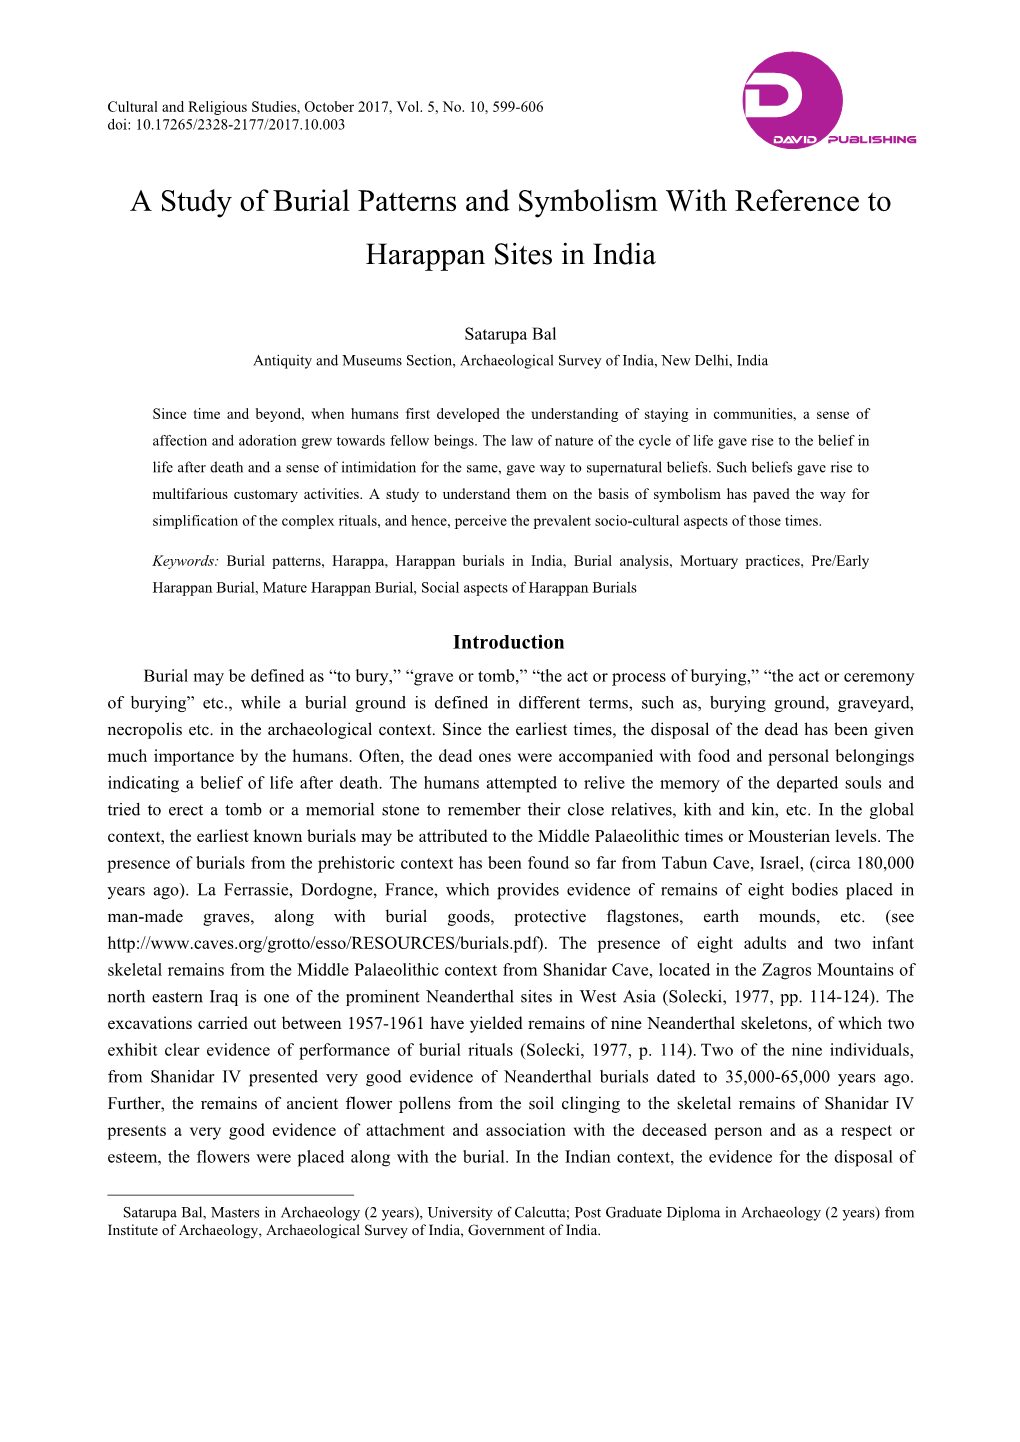 A Study of Burial Patterns and Symbolism with Reference to Harappan Sites in India